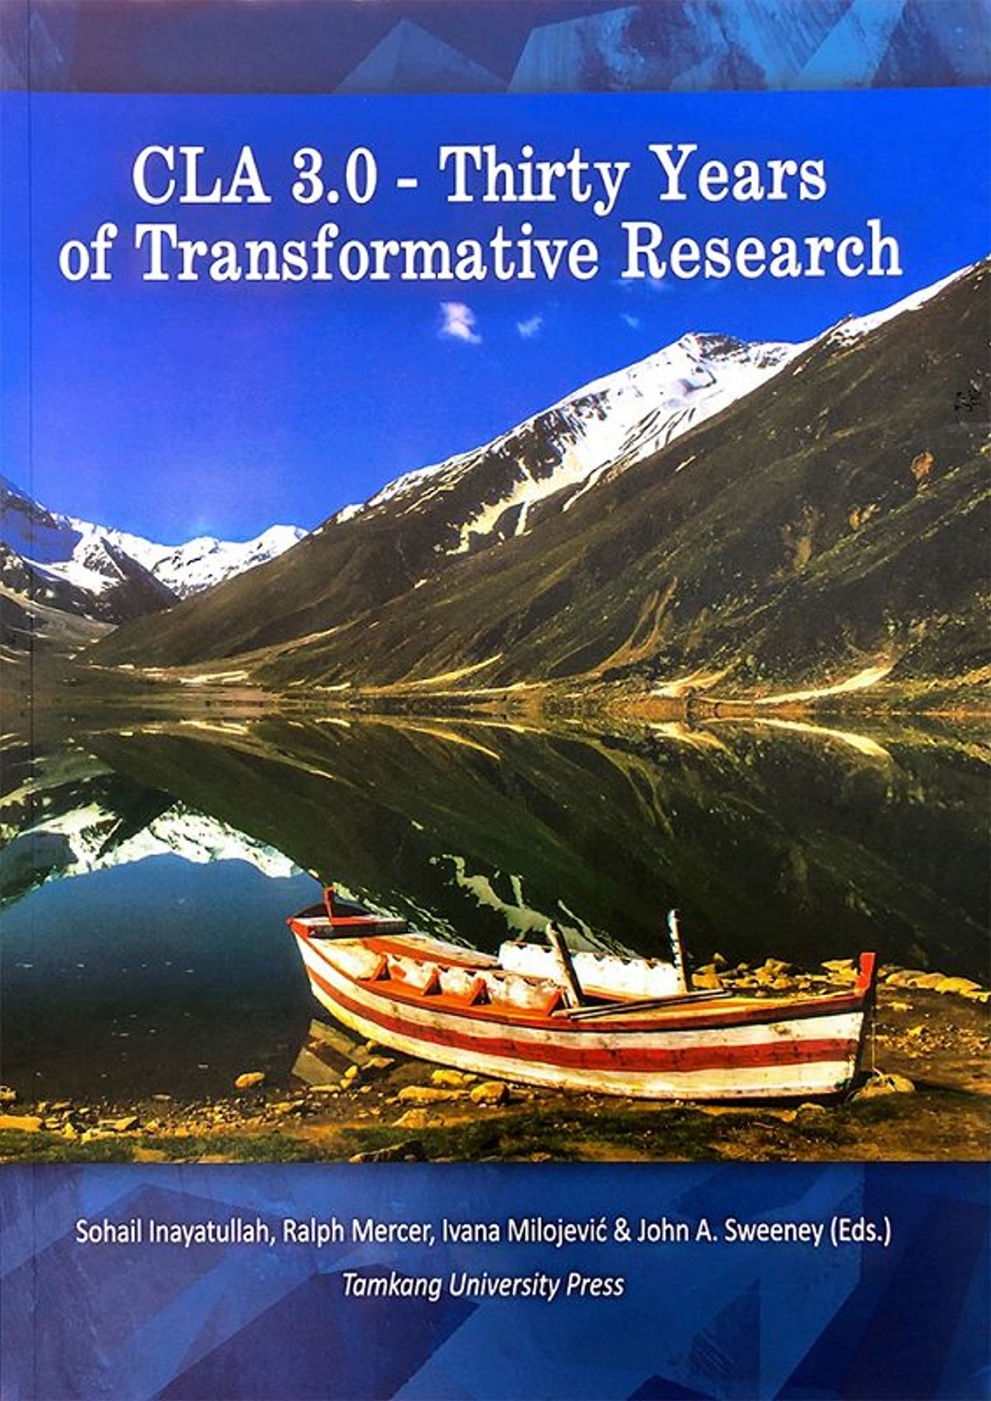 CLA 3.0-THIRTY YEARS OF TRANSFORMATIVE RESEARCH